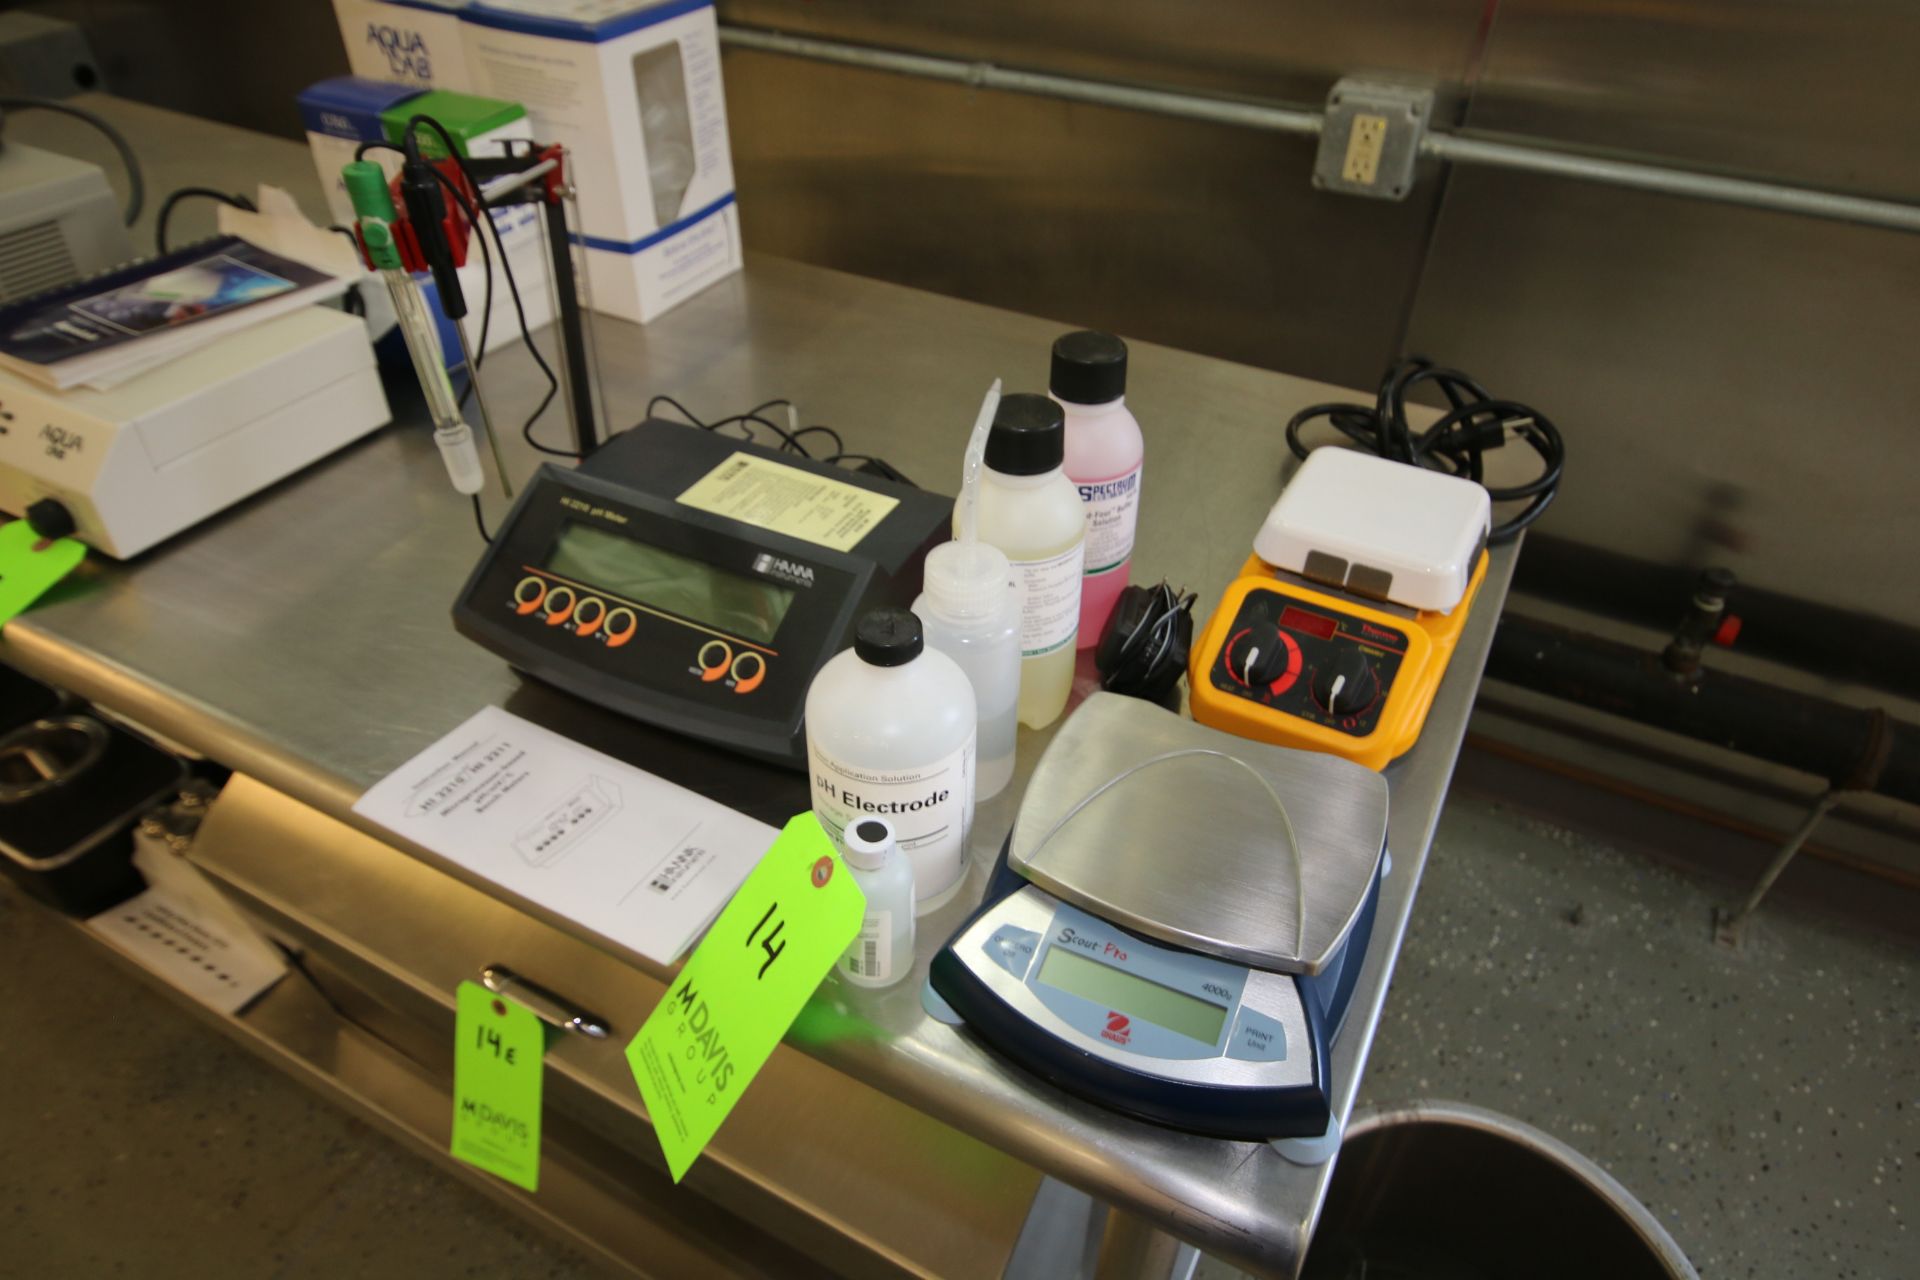 Hanna PH Bench Meter, M/N Hi2210, with Solutions, Thermo Scientific Hot Plate, M/N SP1310, S/N